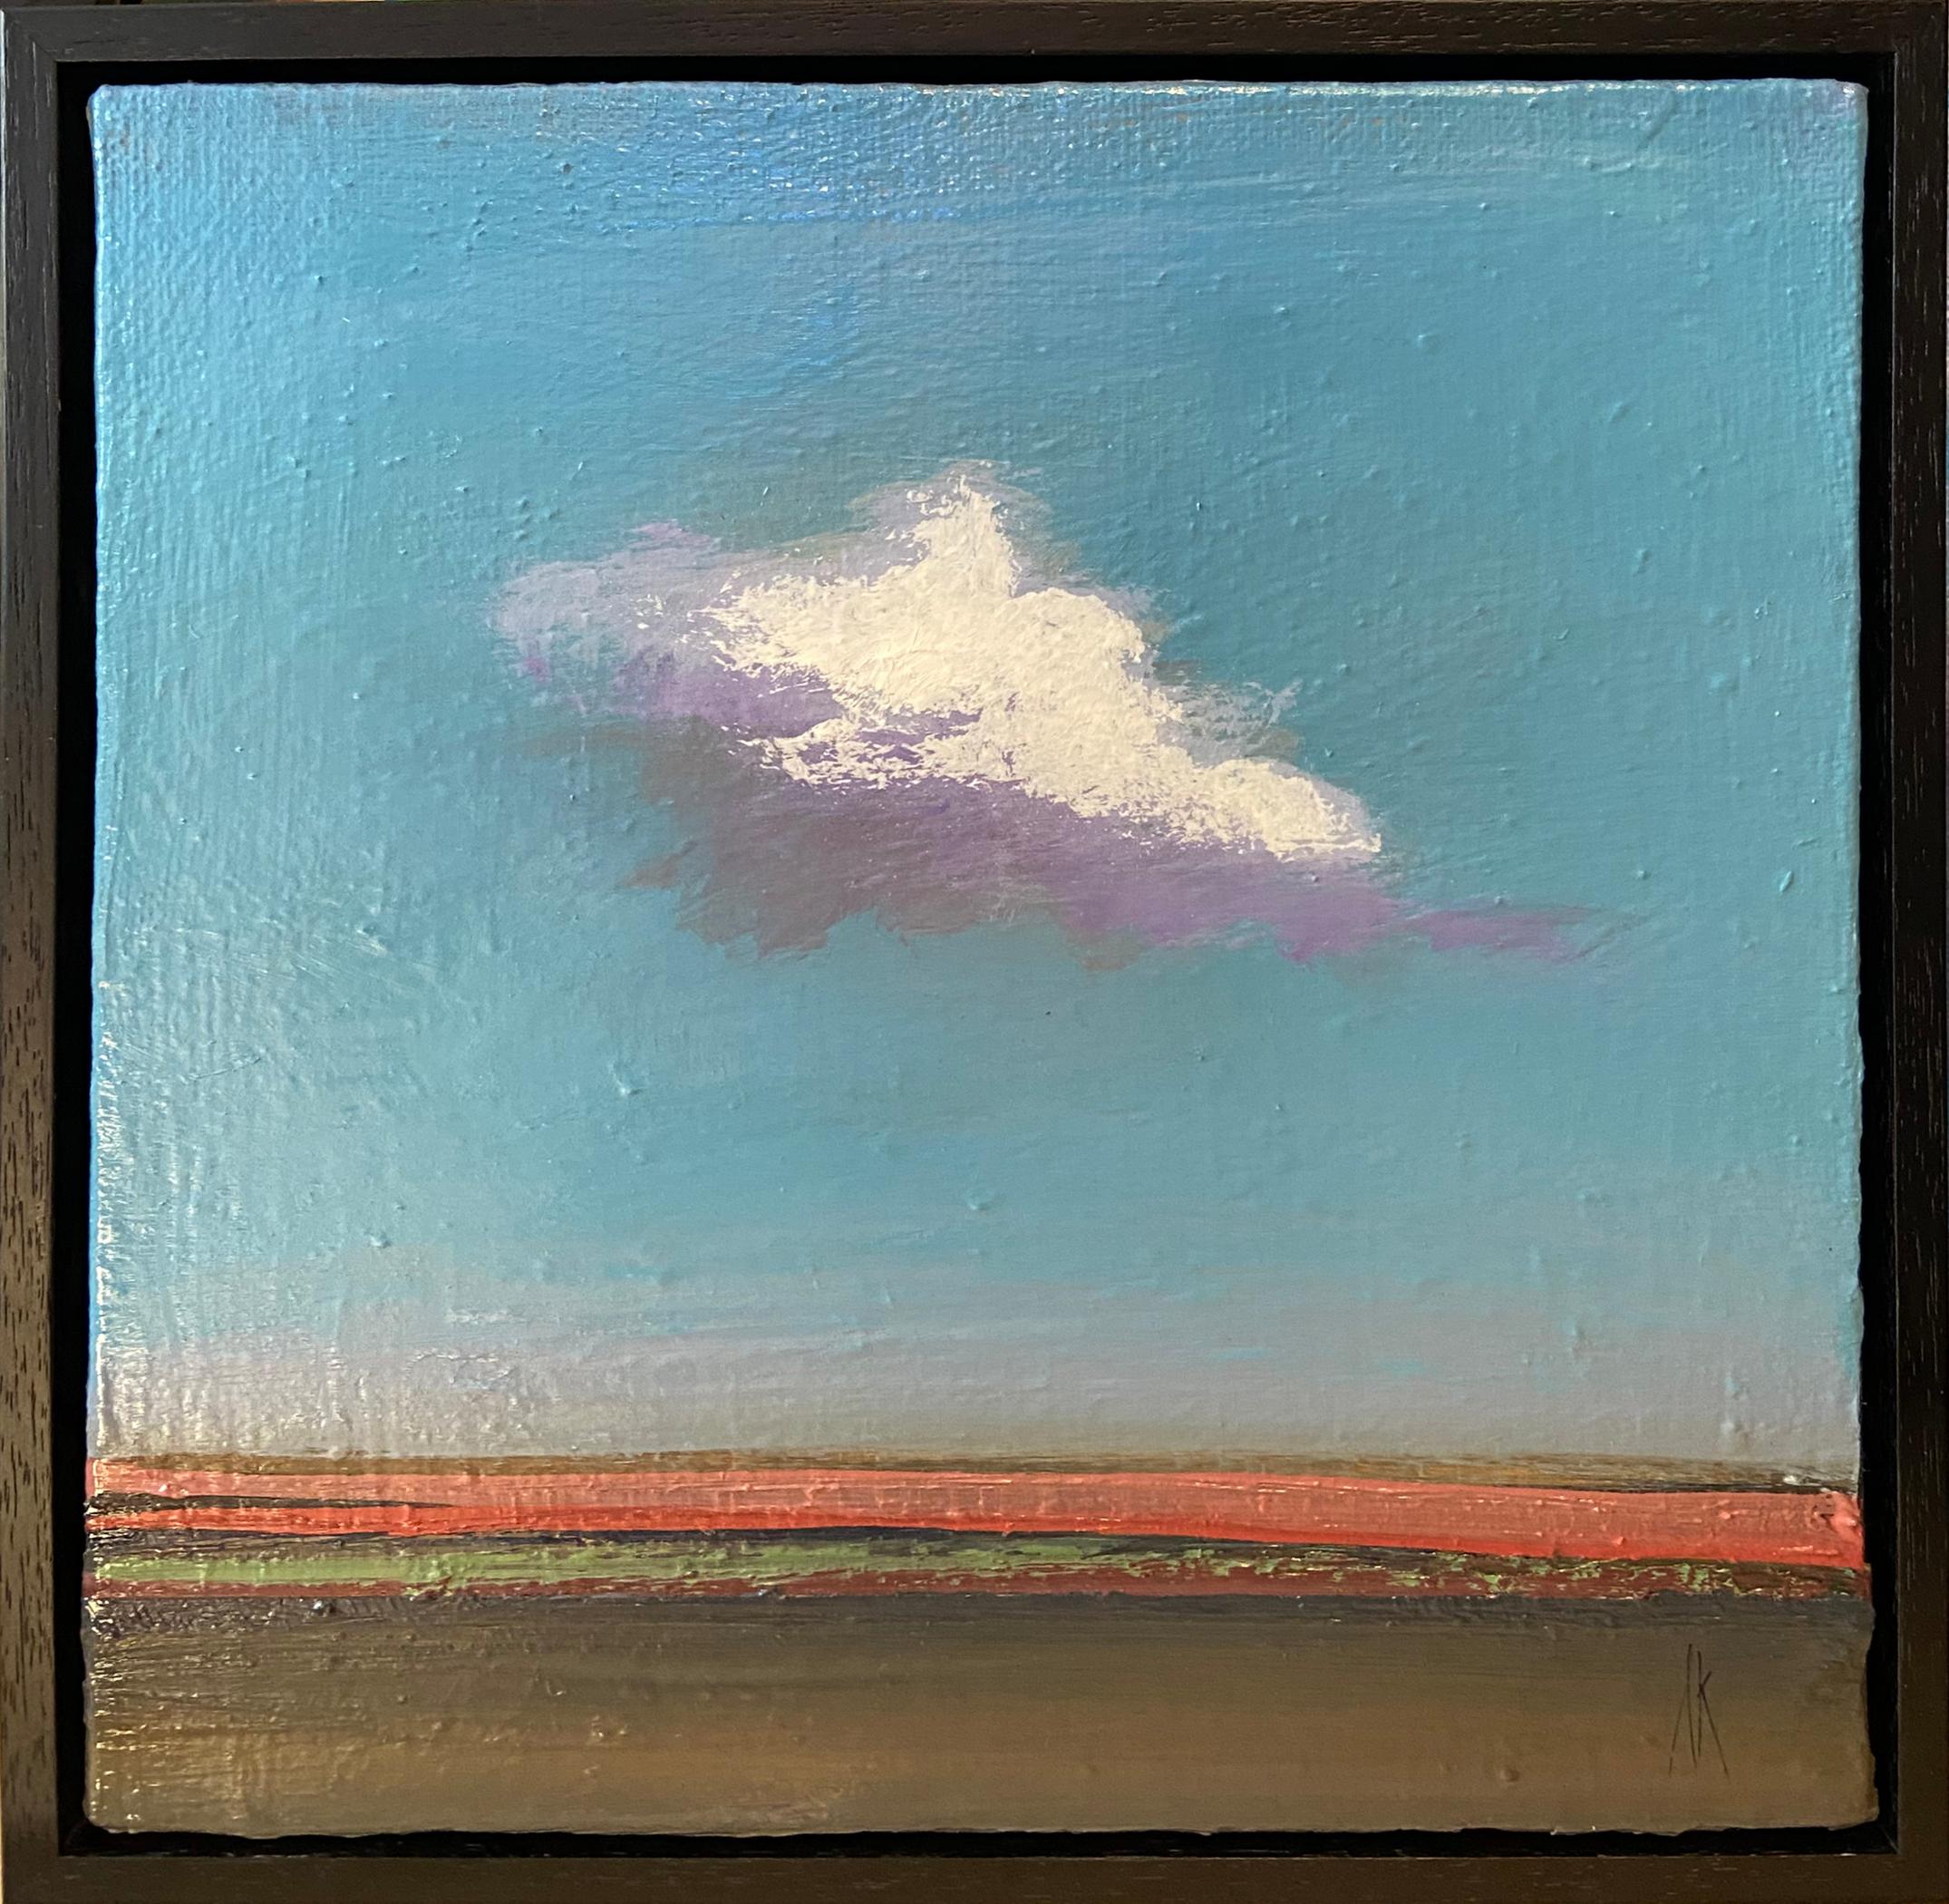 Alyson Kinkade Landscape Painting - Piece of the Sky no.14, 12x12", oil on linen